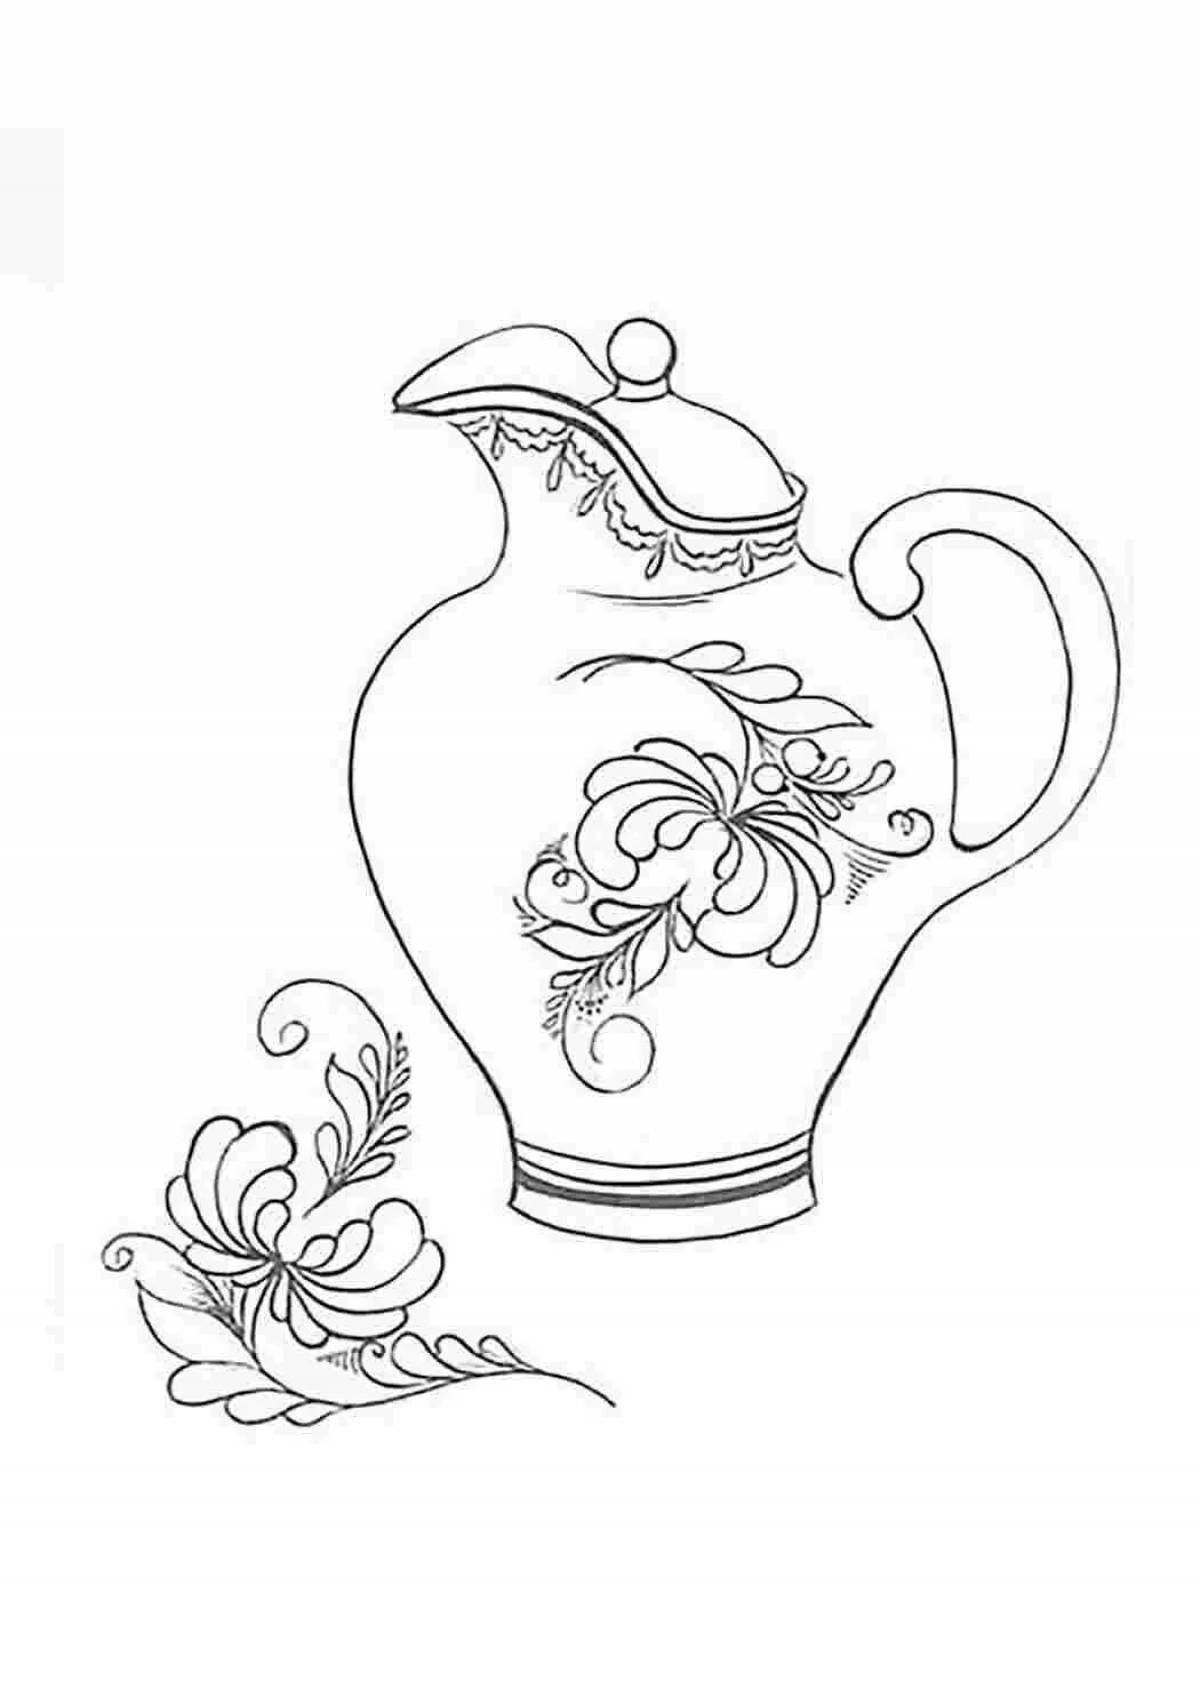 Gzhel mug coloring page with ornament